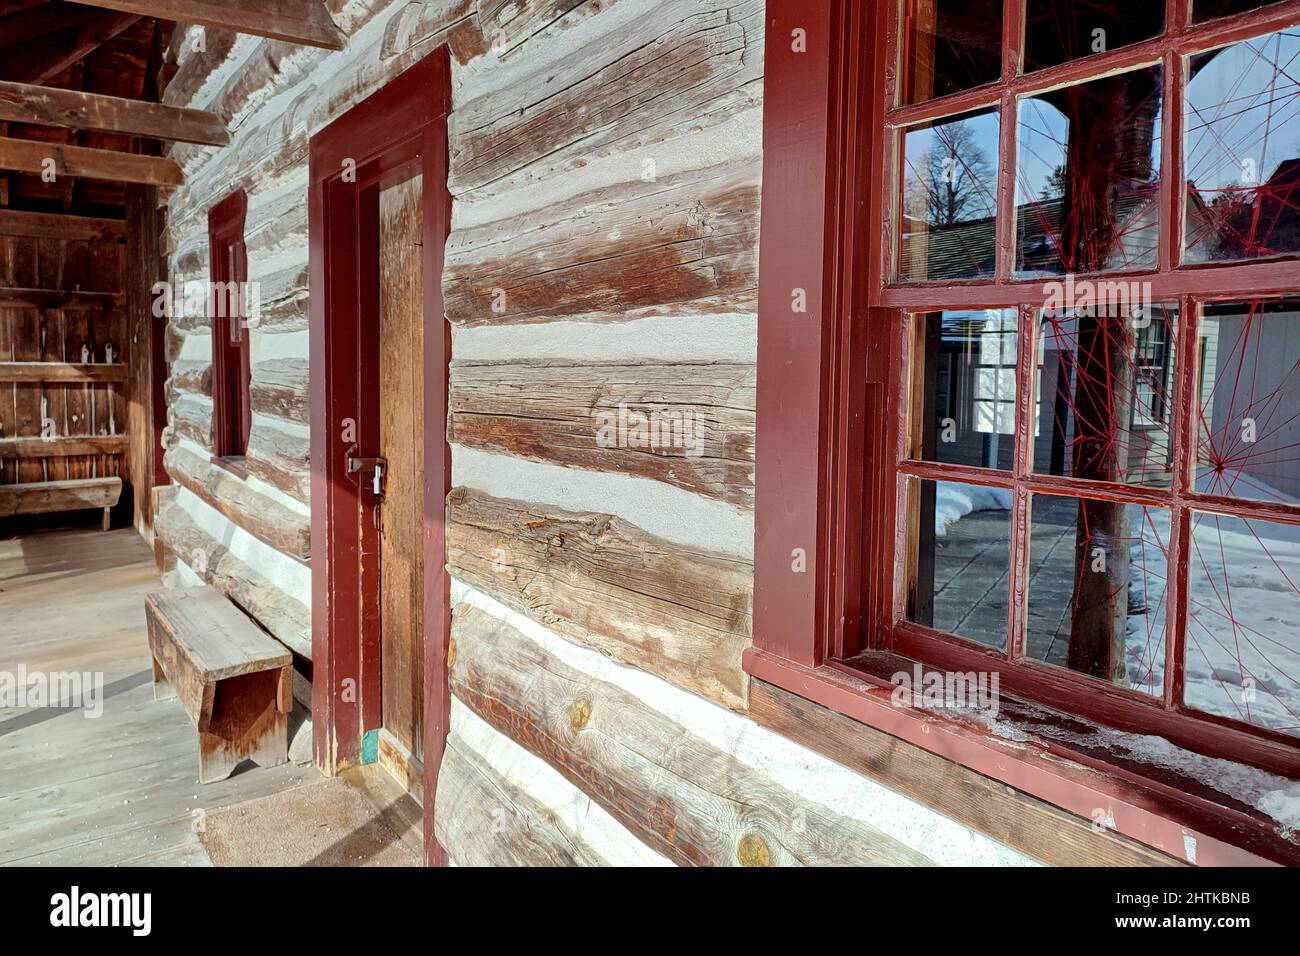 Detail of the log cabin exterior in the public park. Stock Photo